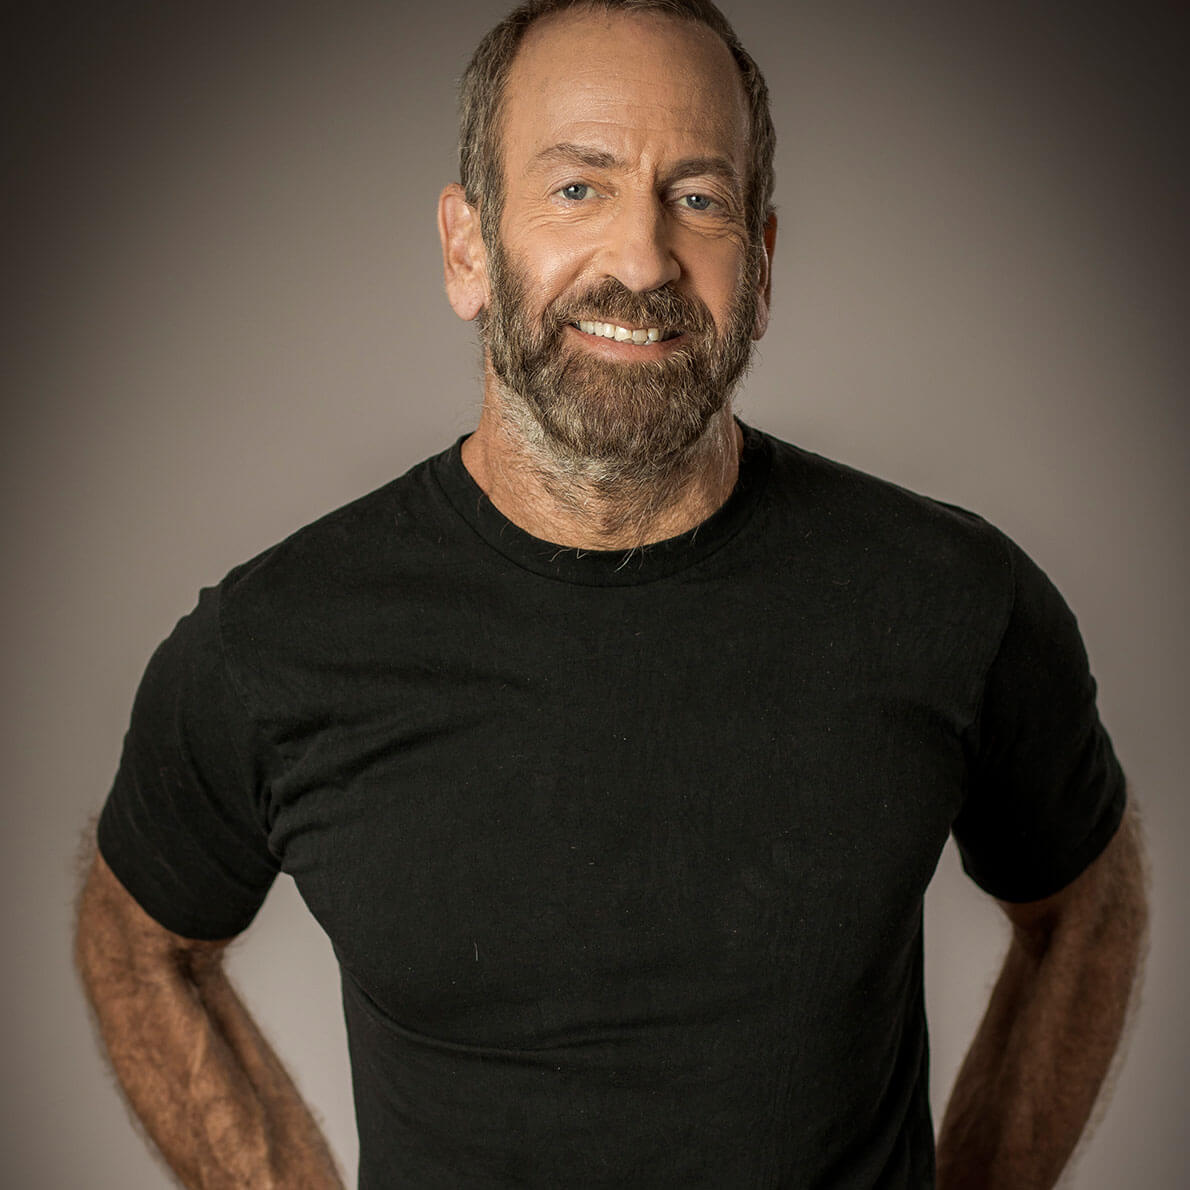 A portrait of a middle-aged man with a beard, wearing a black t-shirt and standing with his hands in his back pocket in front of a grey background.